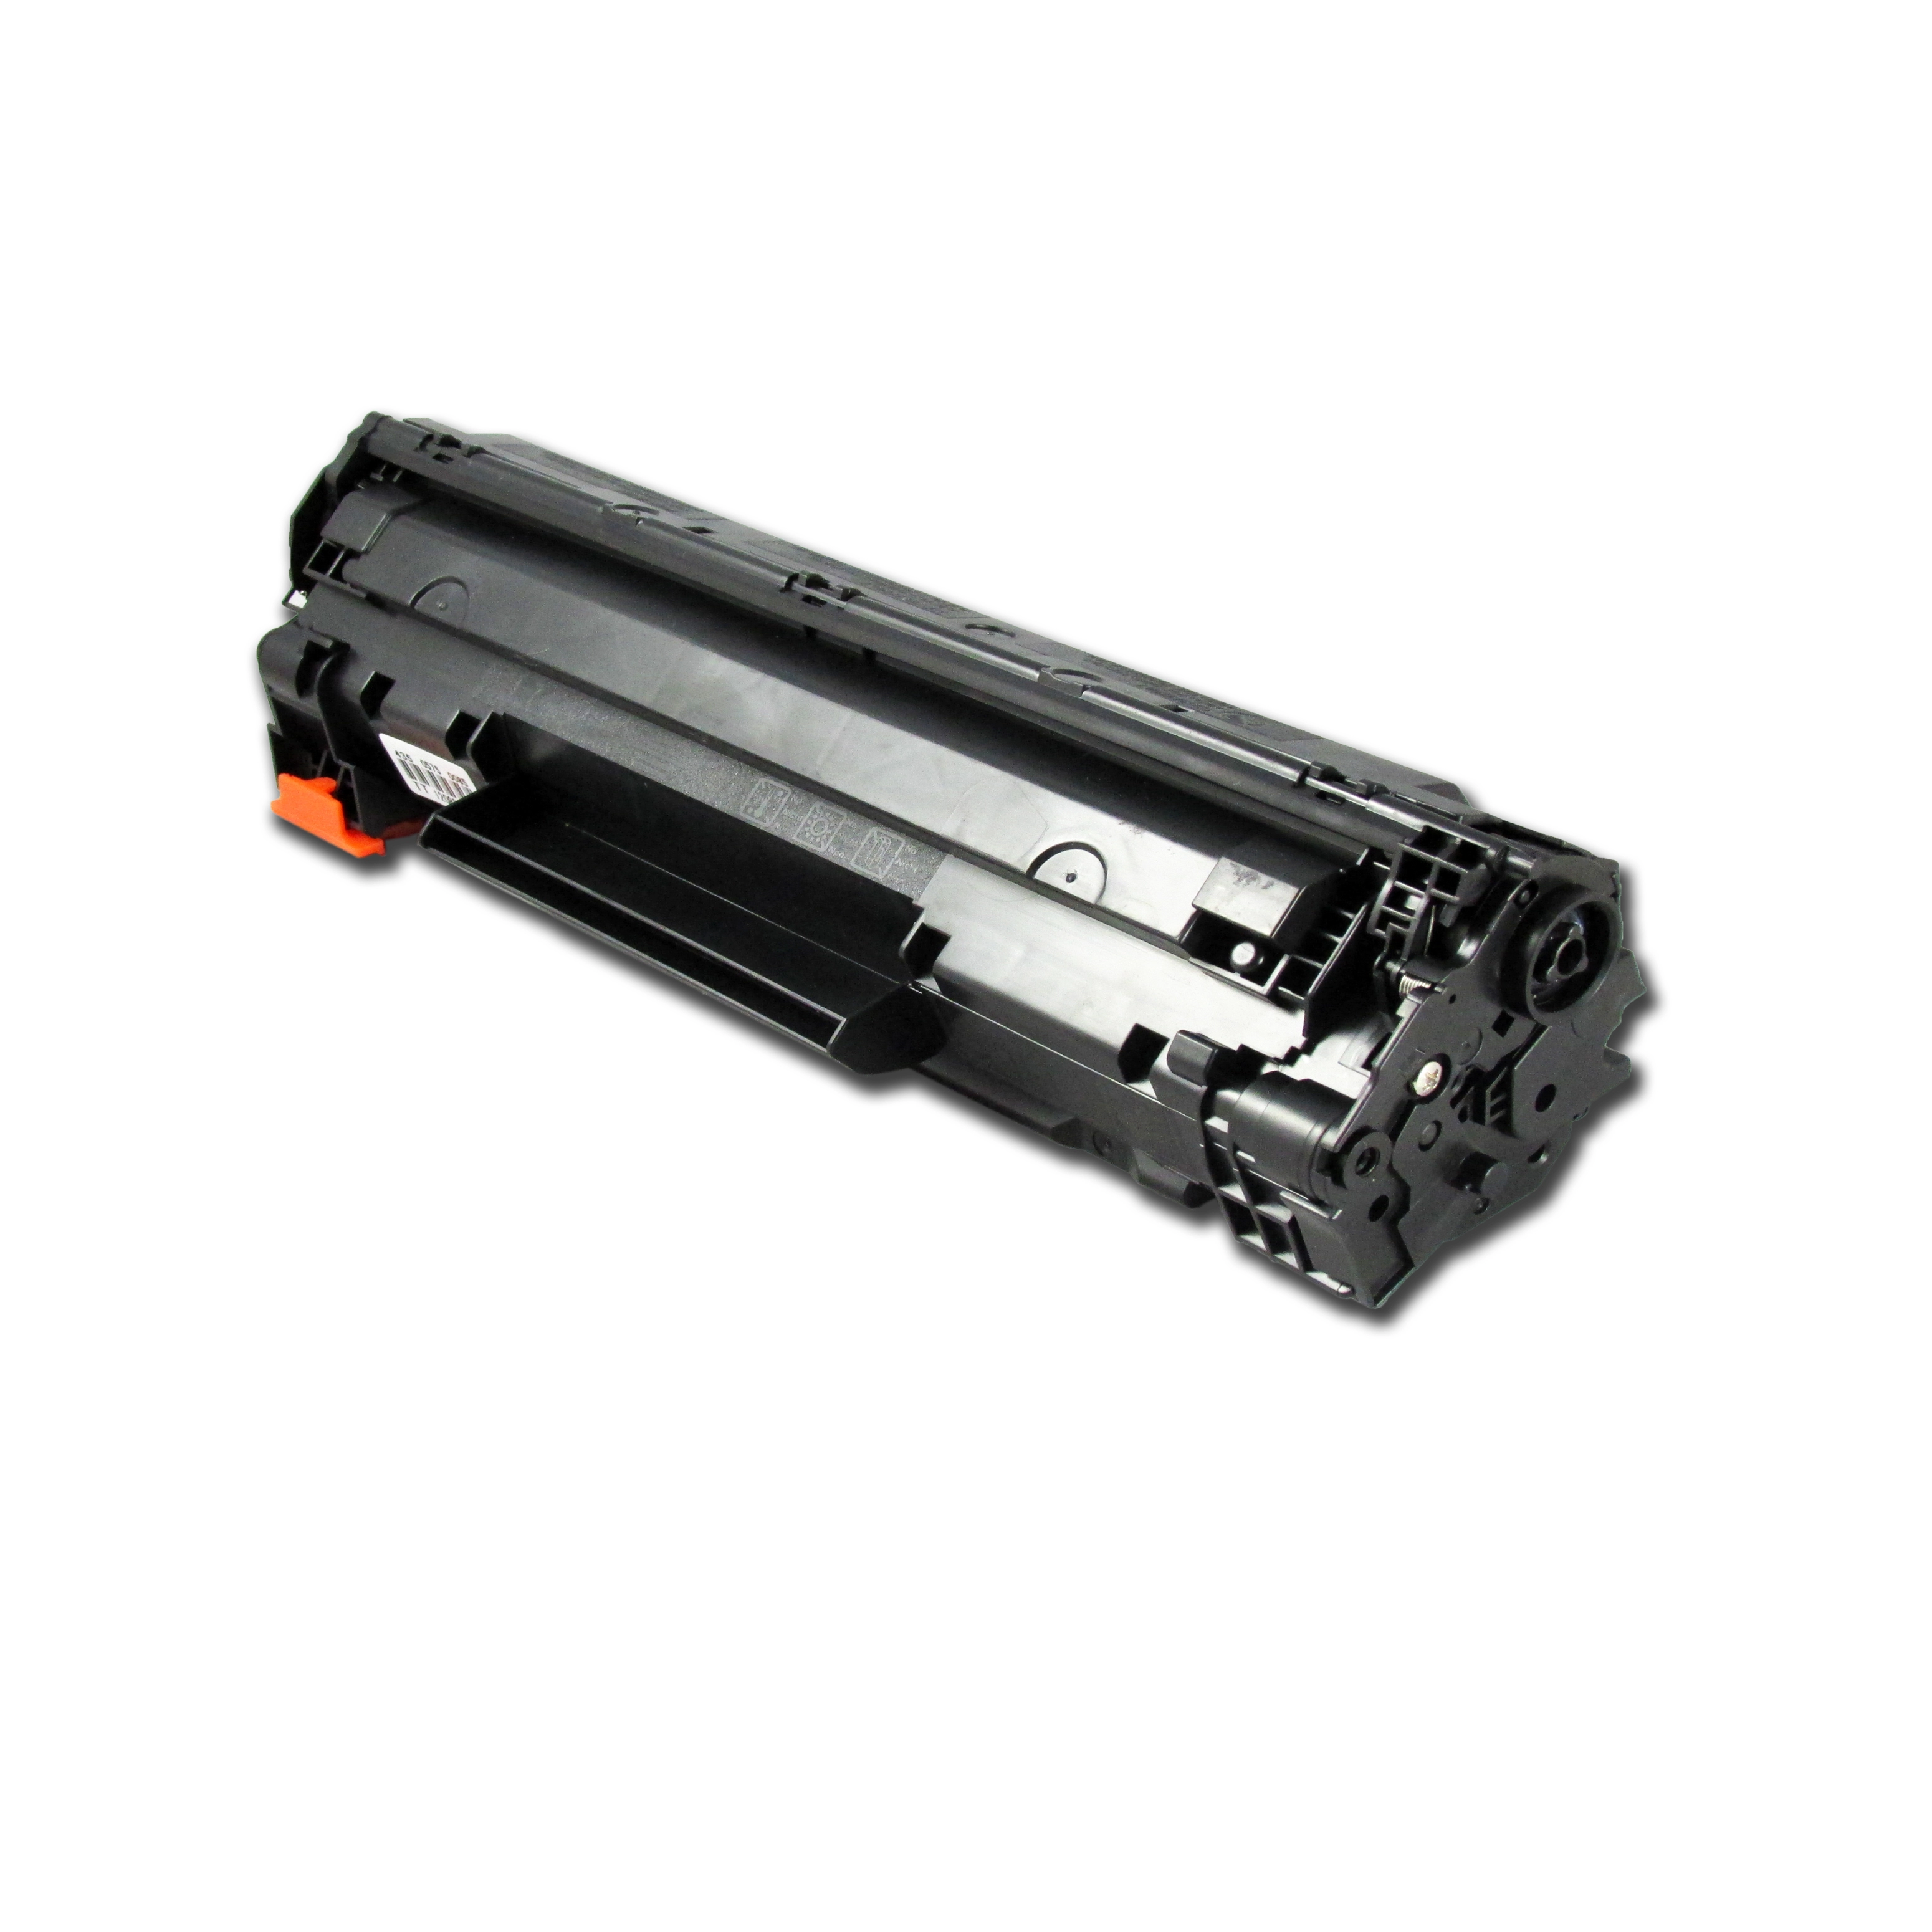 CE285A toner cartridge use for HP 1212nf/1214nfh/1217nfw Pro P1100/1102W Pro M1130/1132/1210